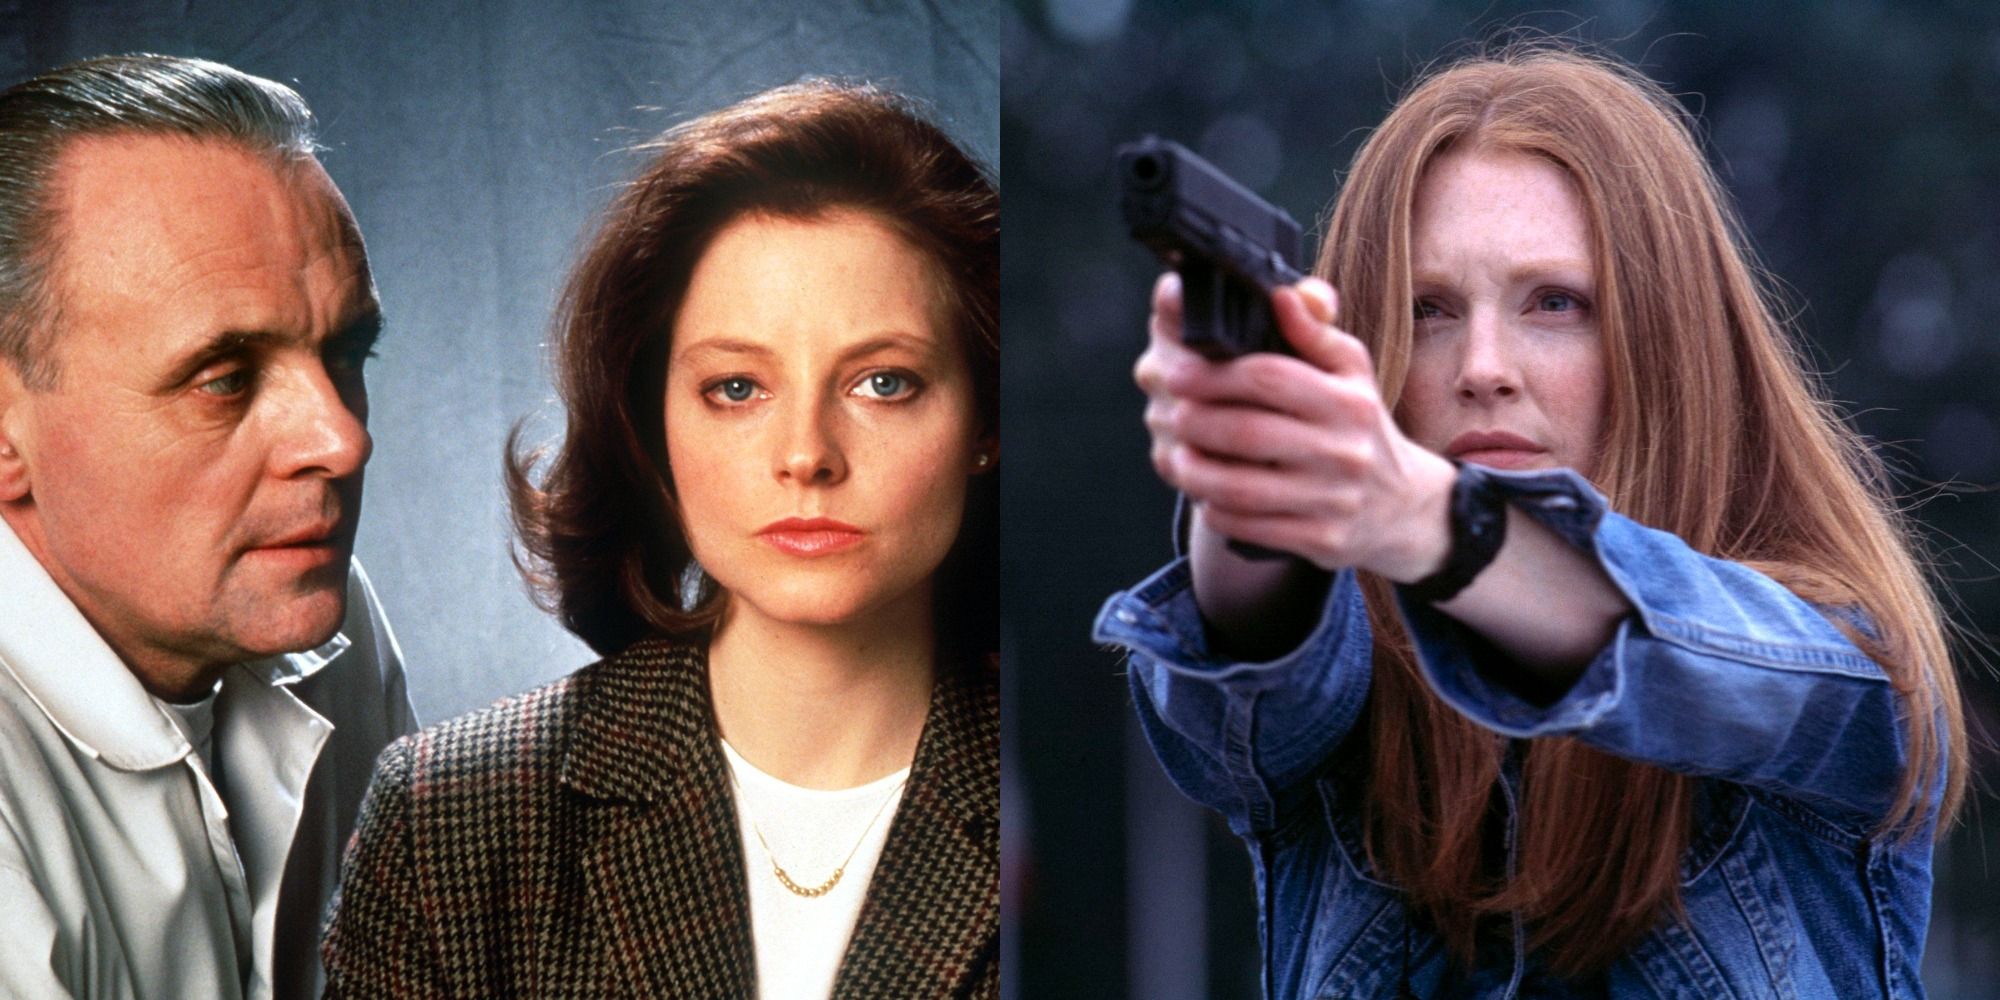 side by side images of Anthony Hopkins Jodie Foster and Julianne Moore in the Hannibal Lecter films